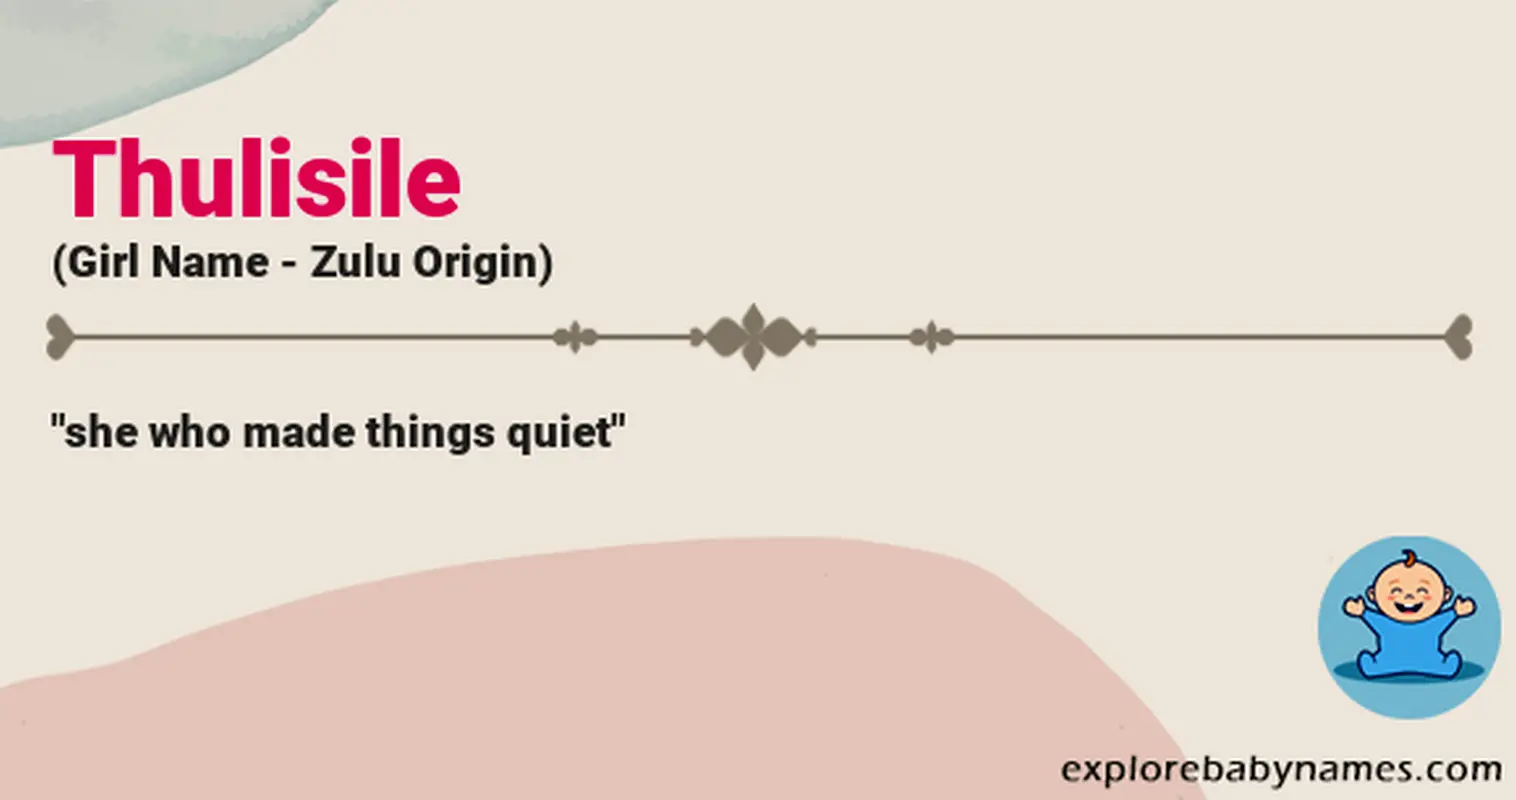 Meaning of Thulisile